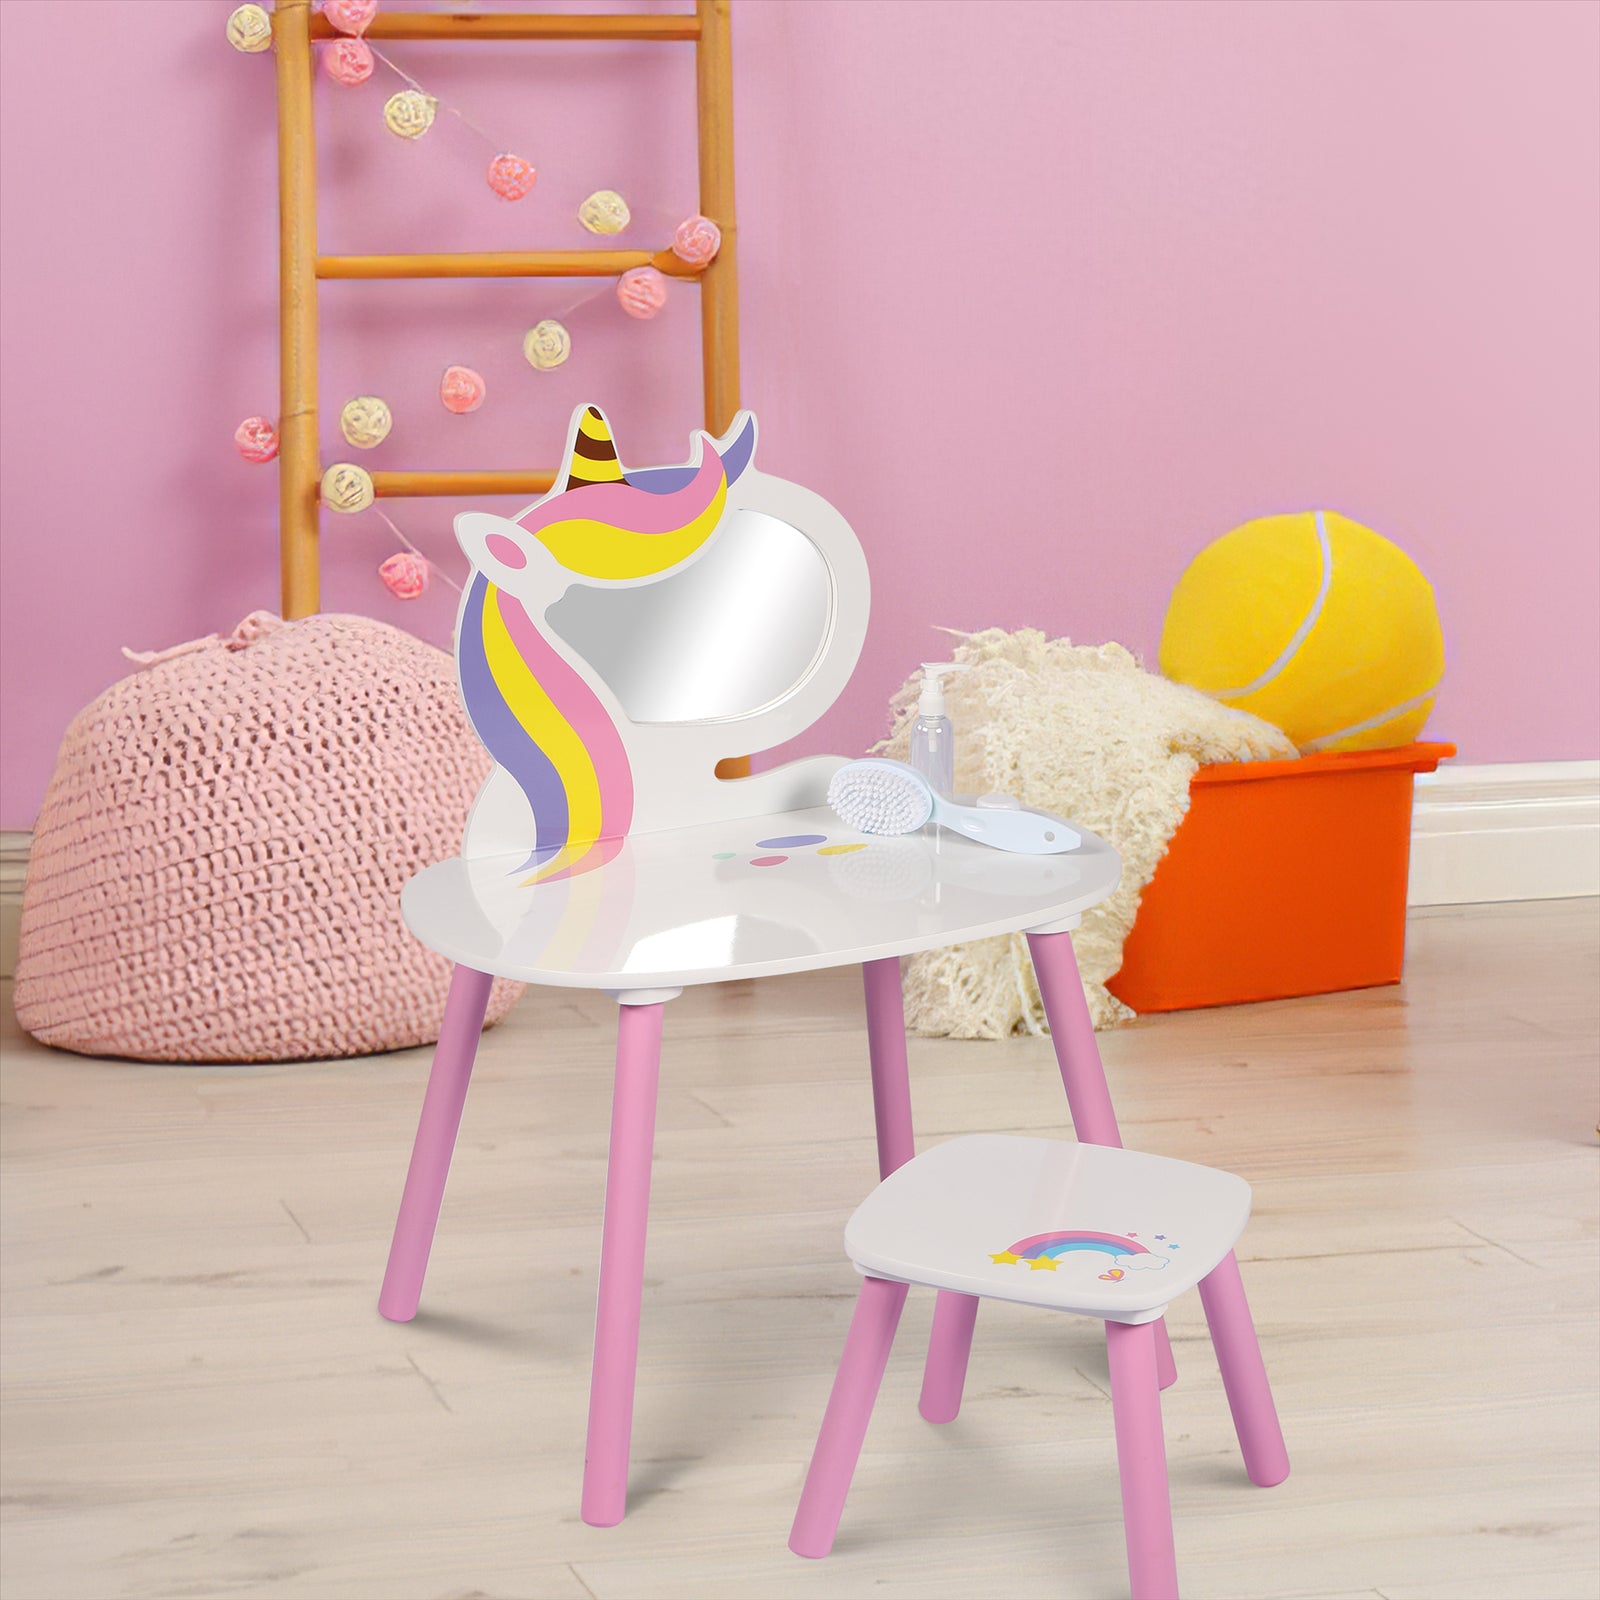 Princess Vanity Table with Stool Kids Play Toy by The Magic Toy Shop - UKBuyZone